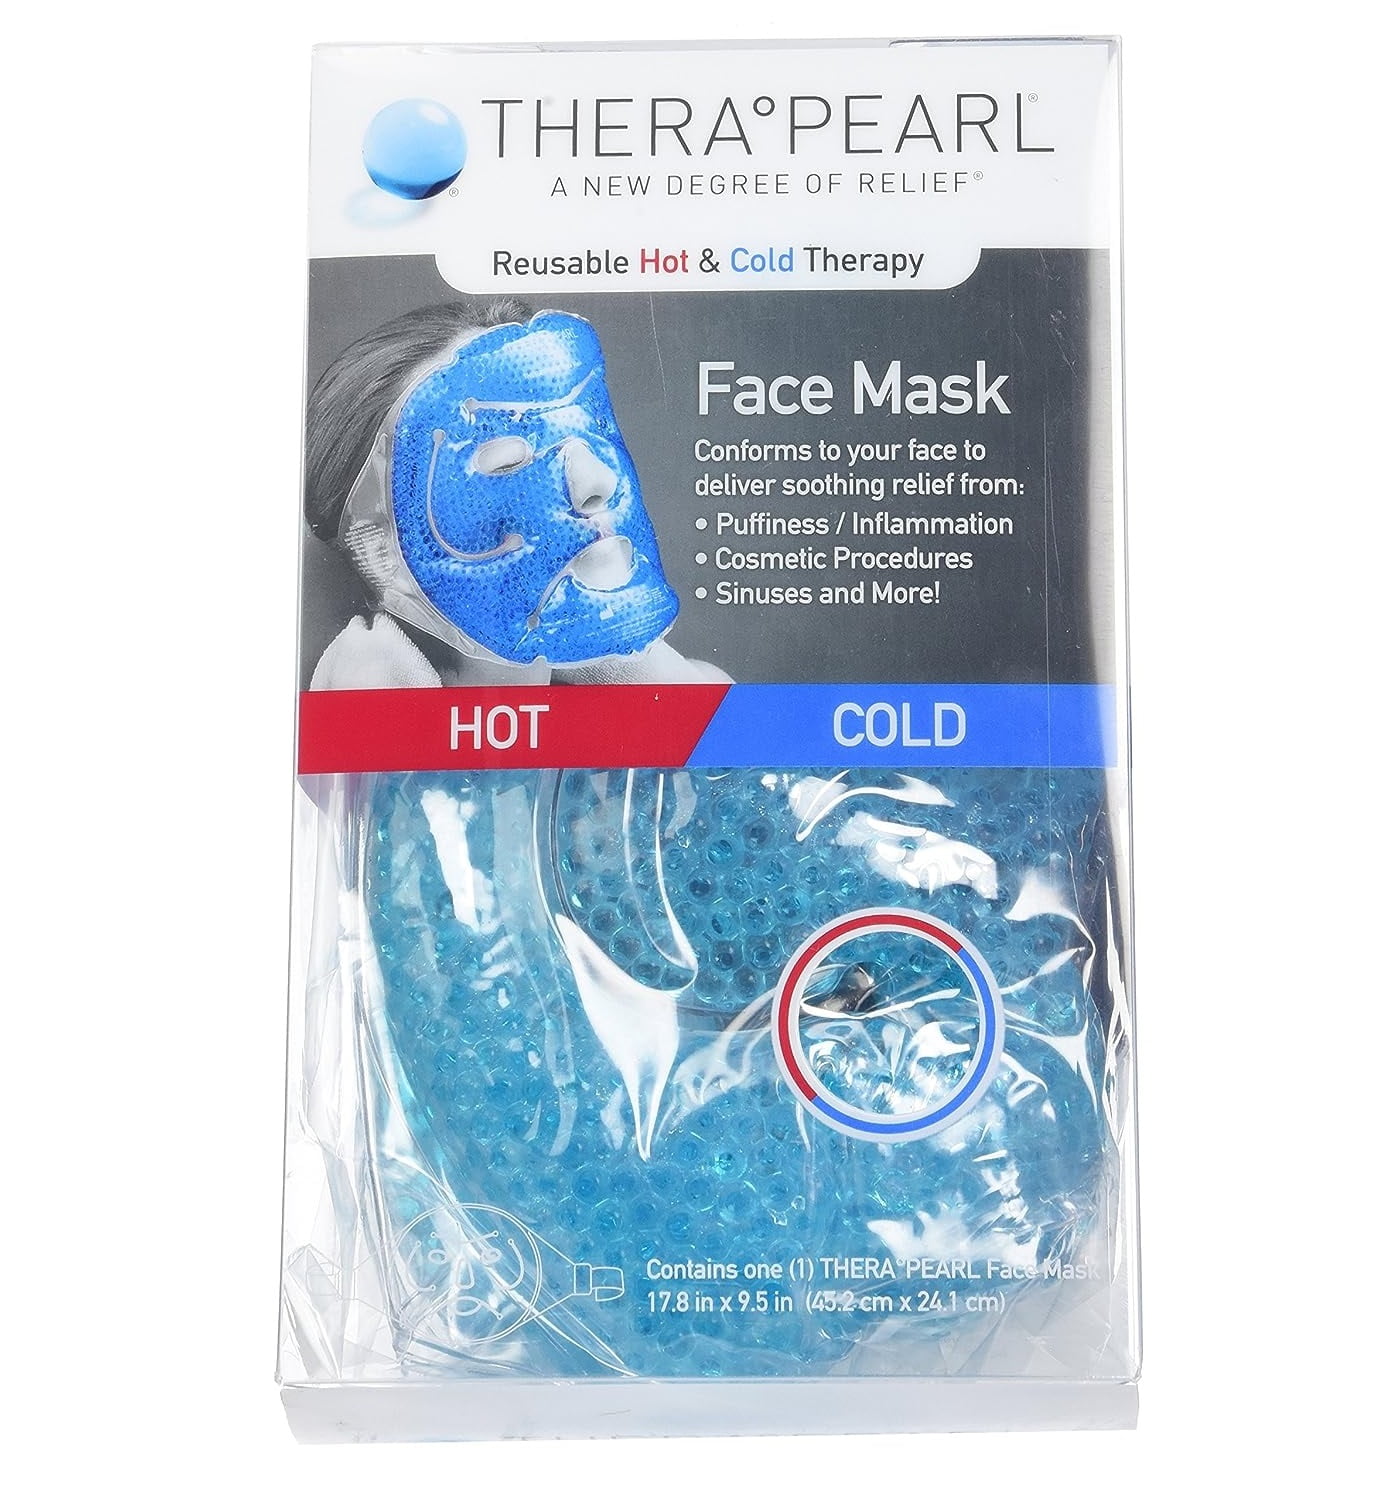 TheraPearl Reusable Hot and Cold Face Mask - Walmart.com